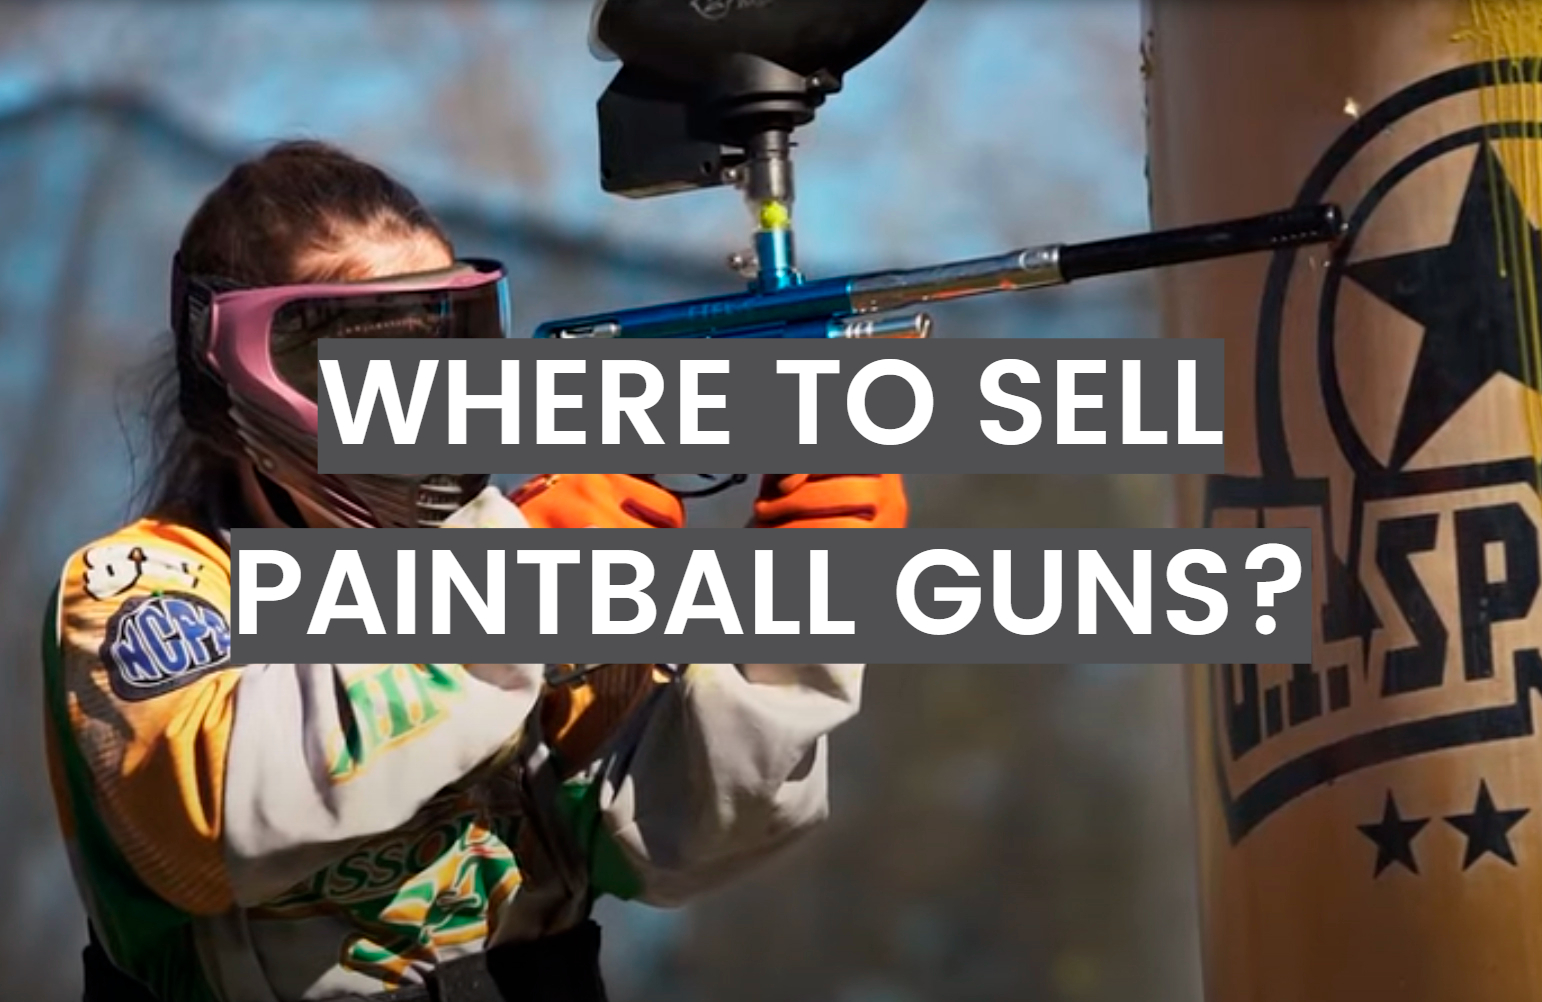 Where to Sell Paintball Guns?